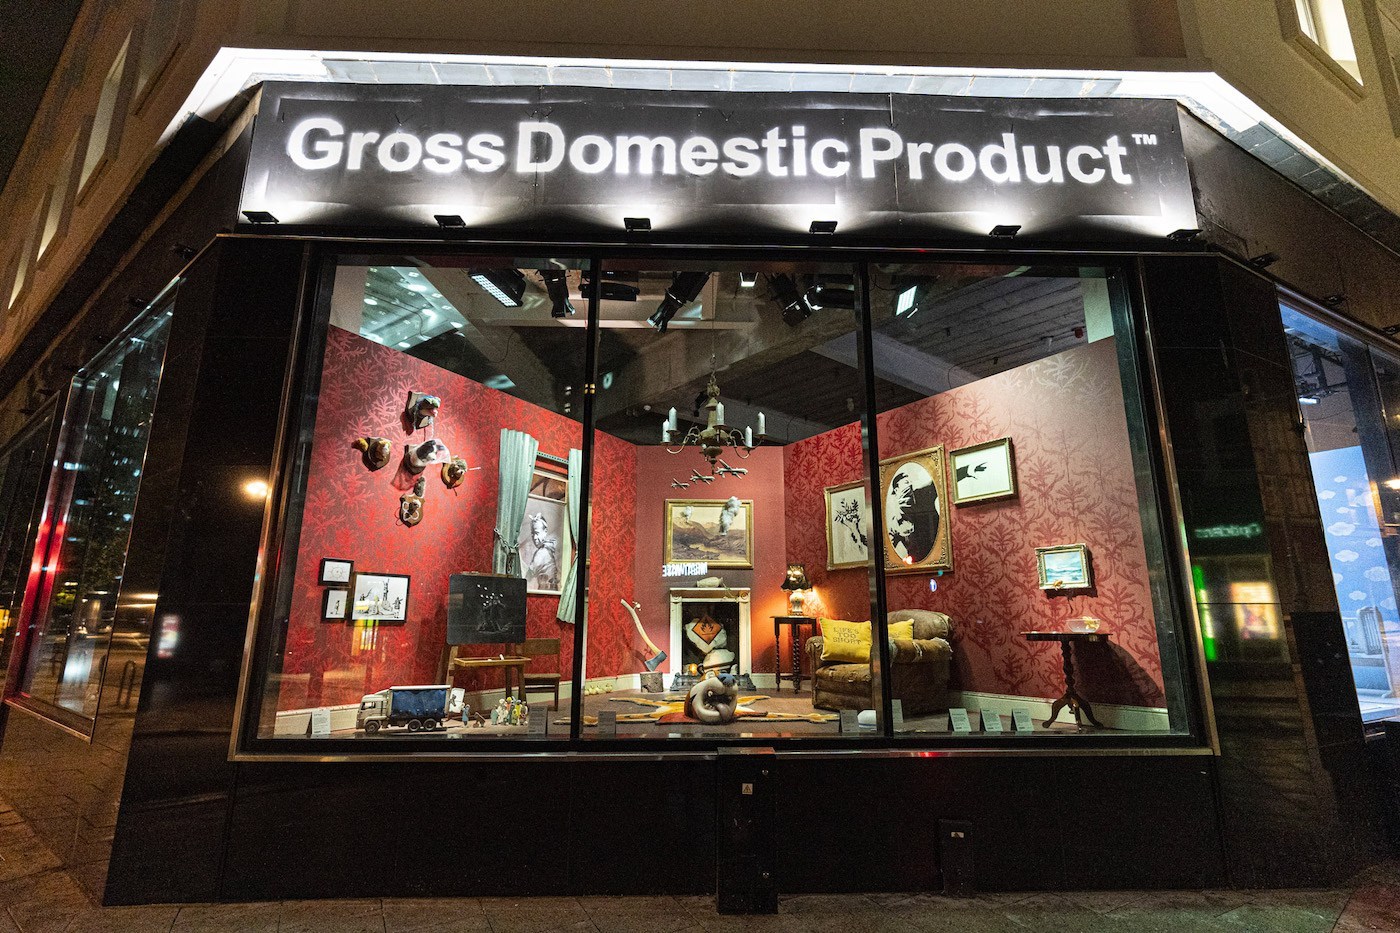 Gross-Domestic-Product-1-